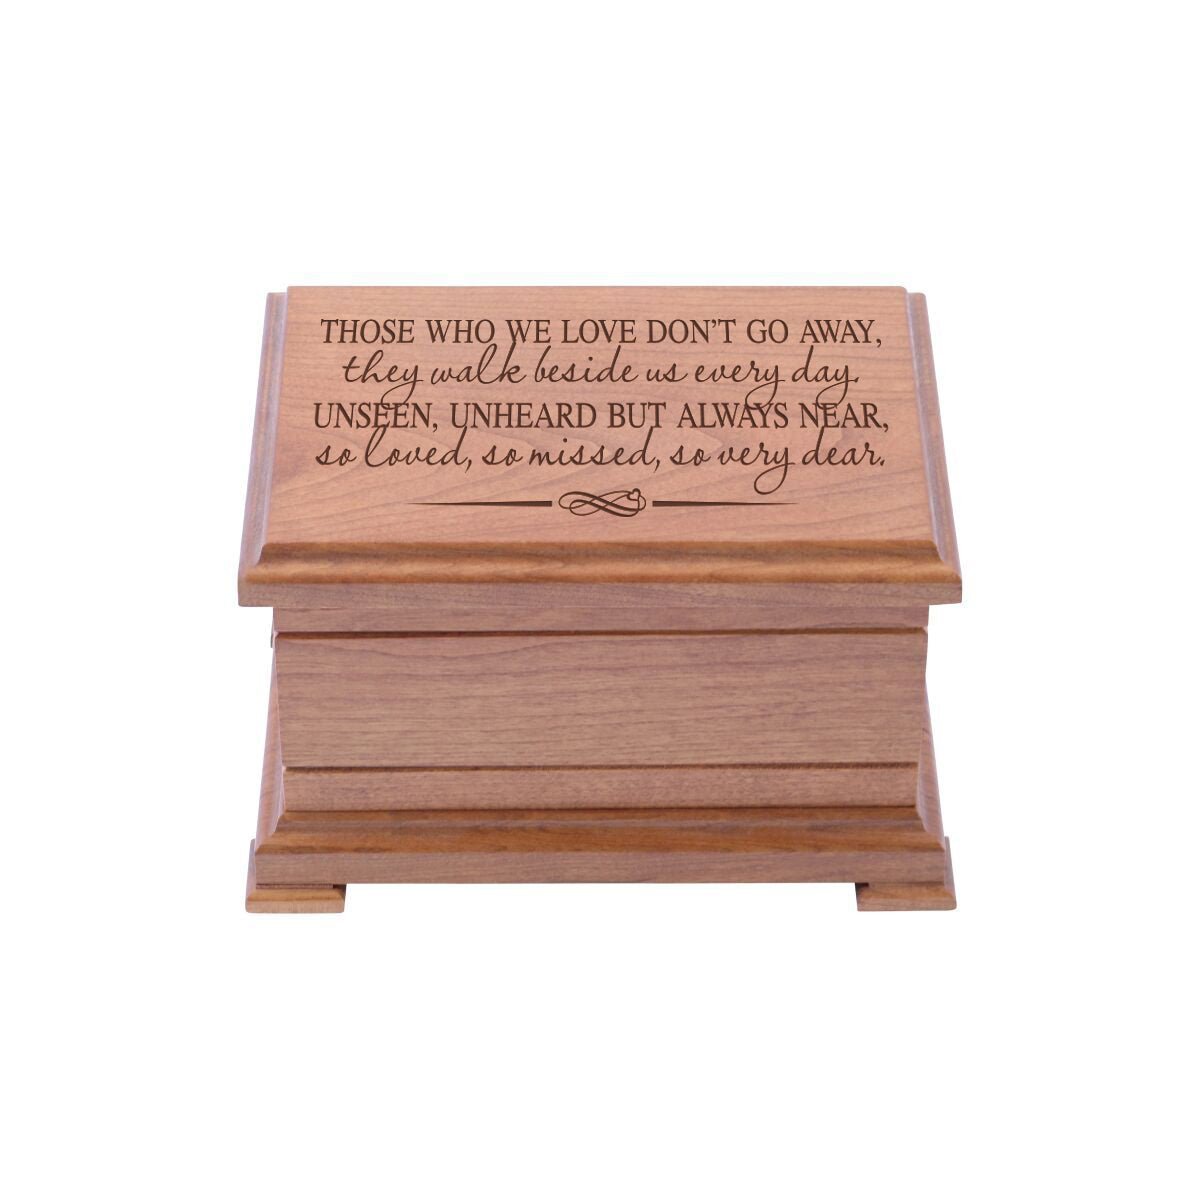 Engraved Wooden Urn Box for Human Ashes 9.75" x 7.75" x 4.25" holds 210 cu in Those Who We Love - LifeSong Milestones